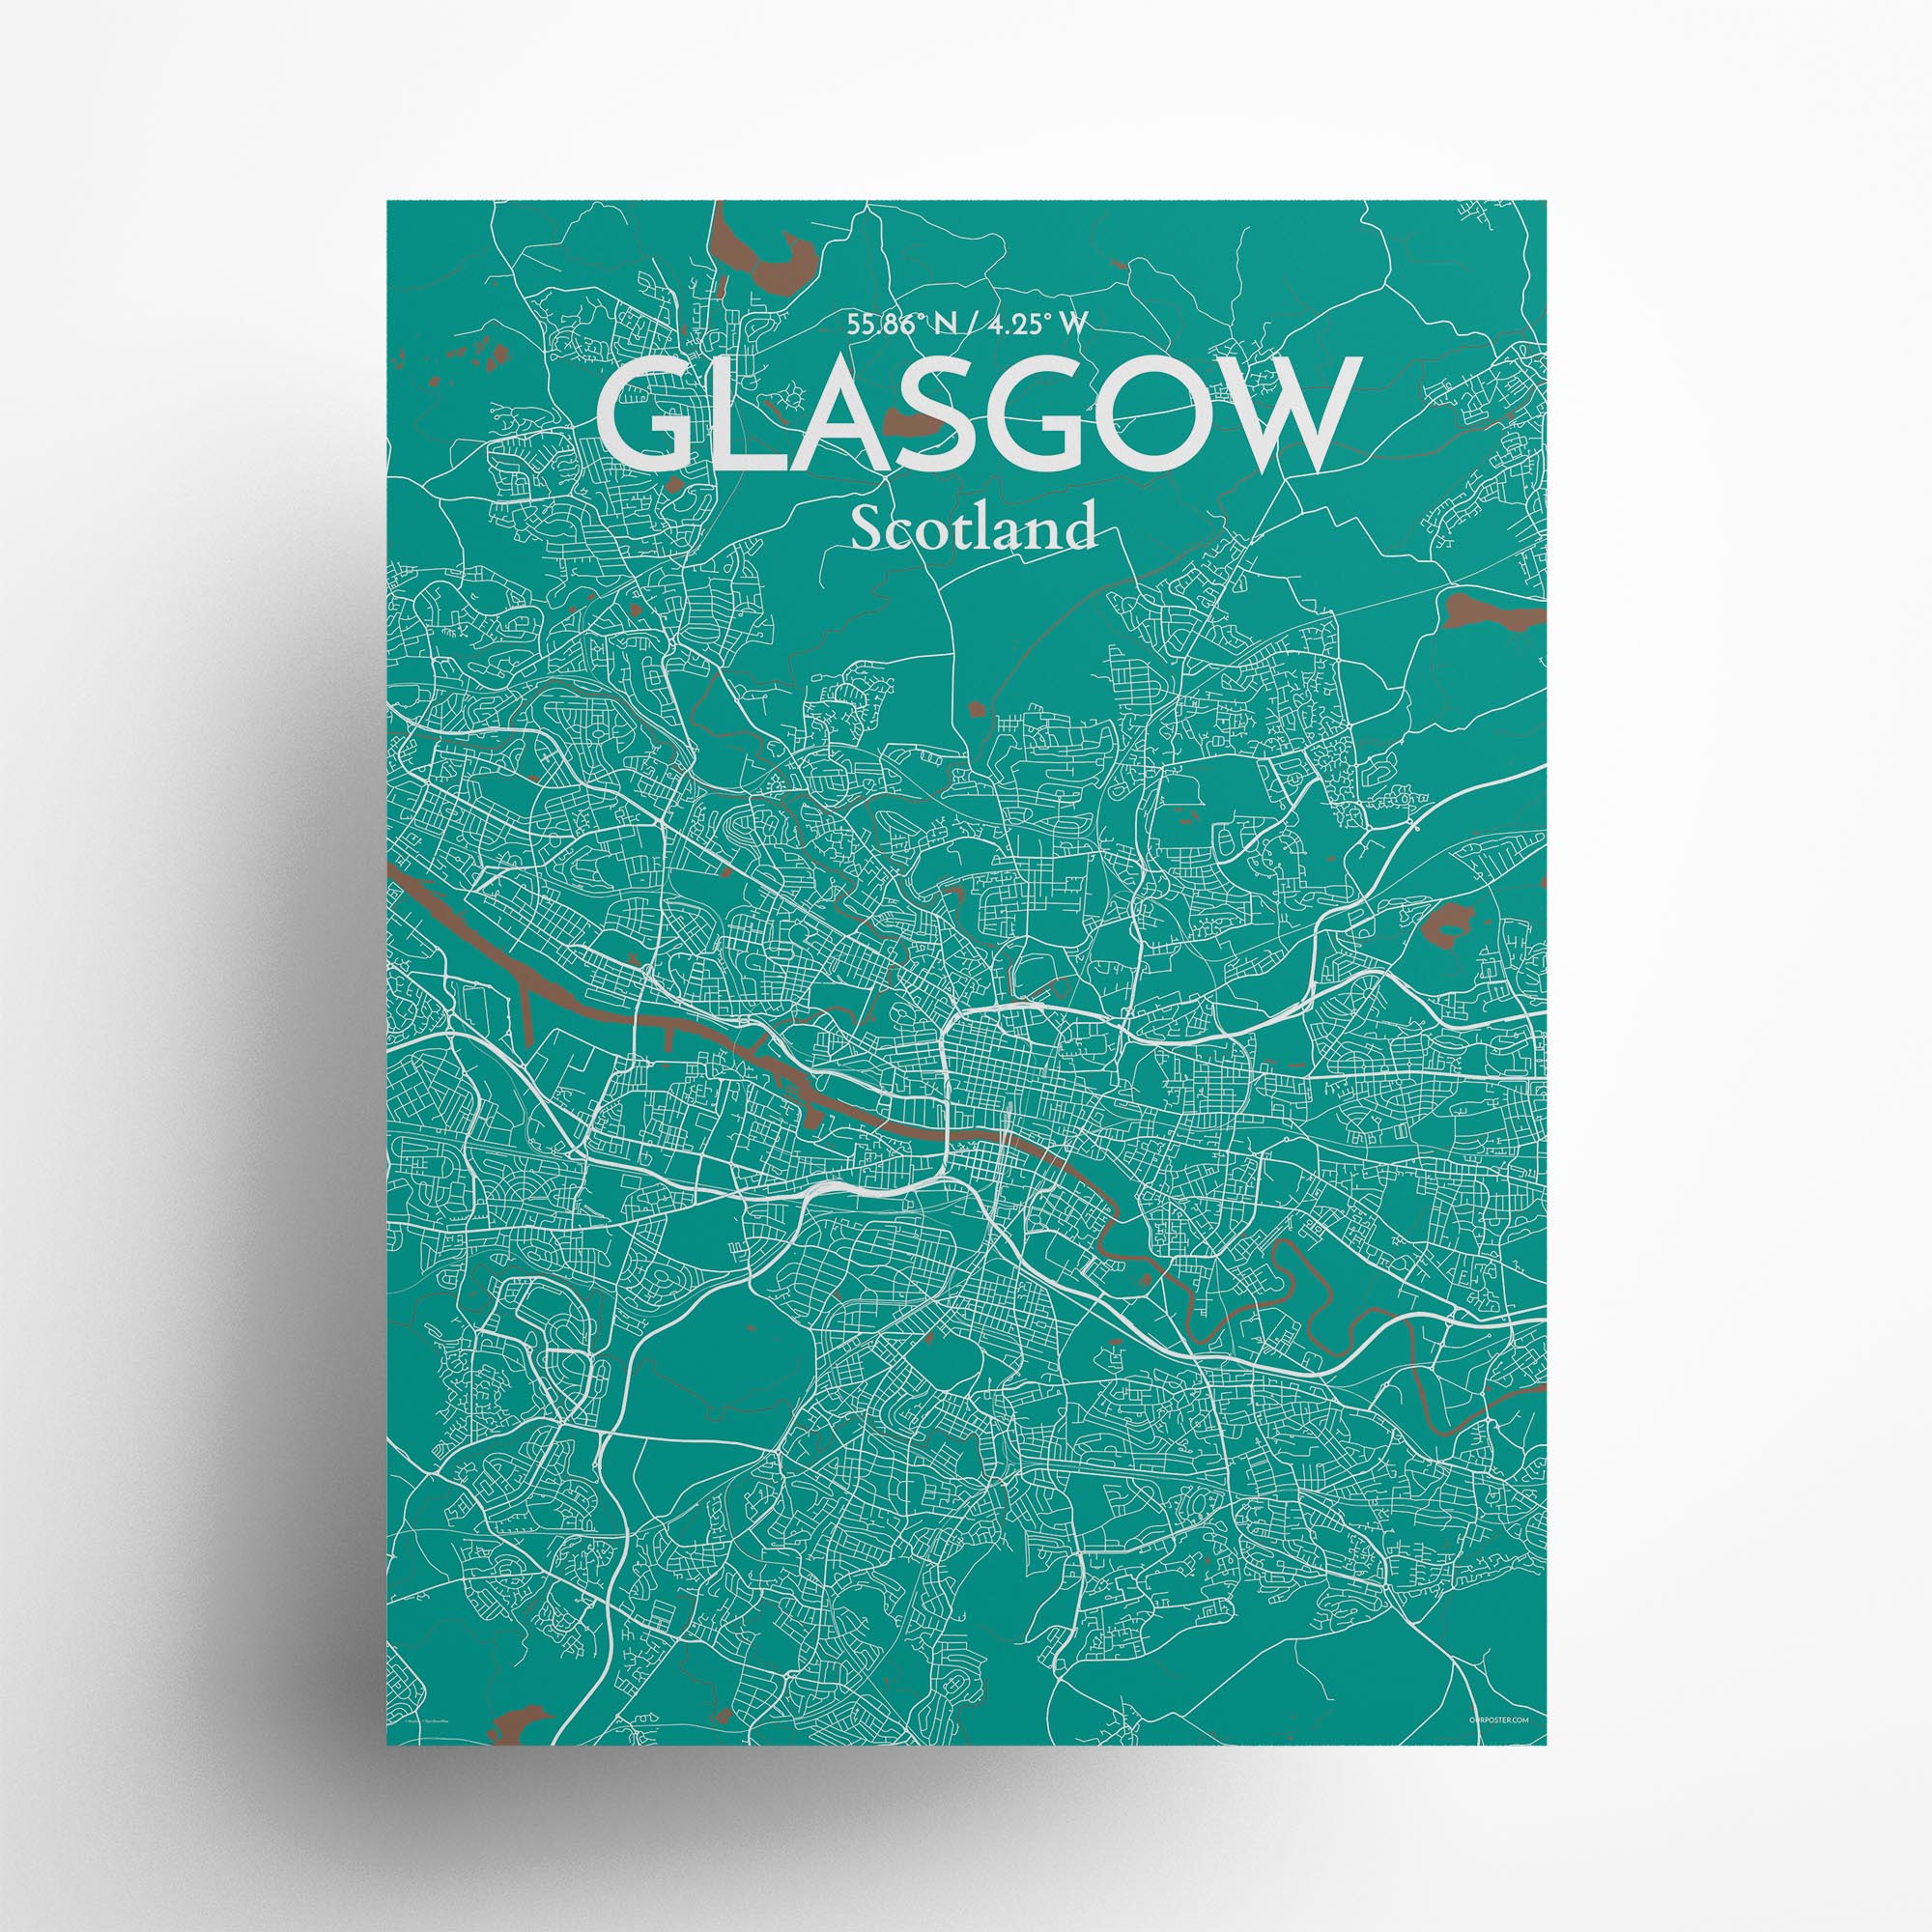 Glasgow city map poster in Nature of size 18" x 24"